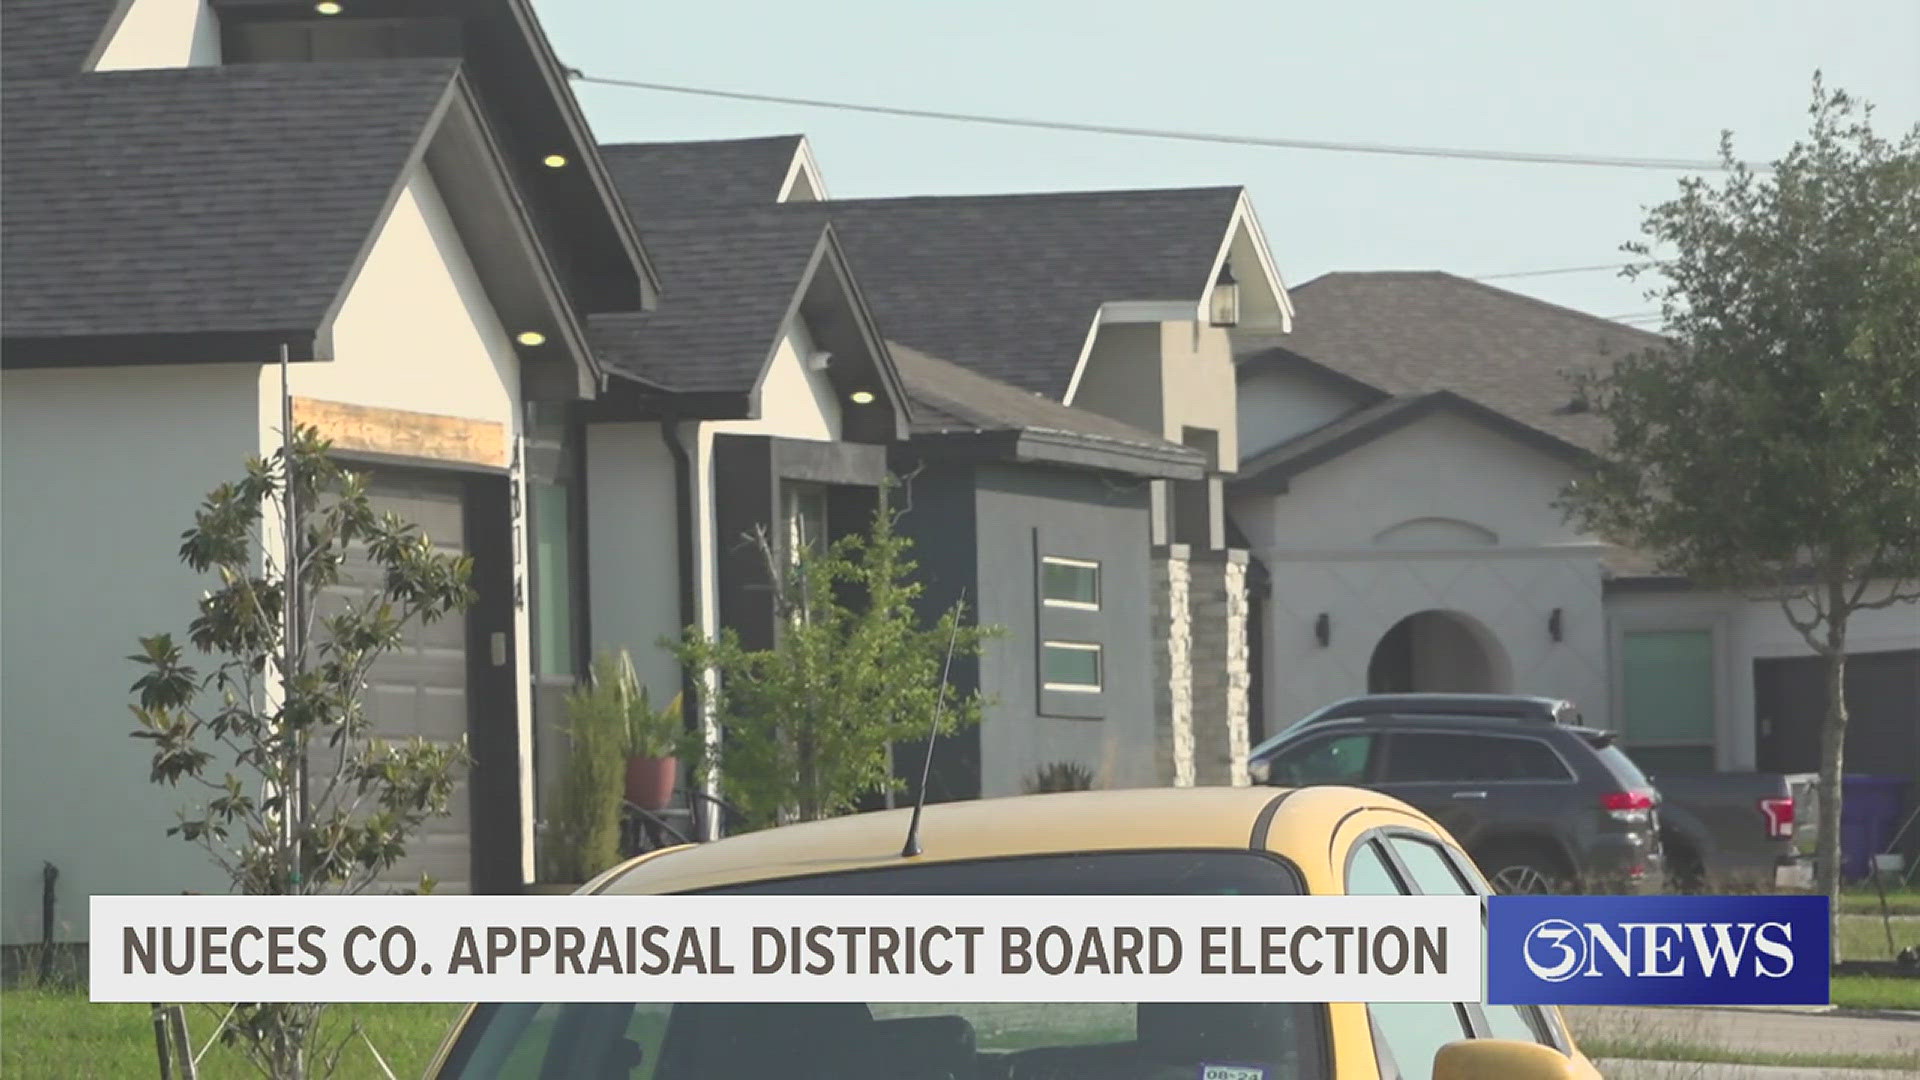 Three individuals will be elected onto the board and the process will help provide balance between everyday taxpayers and the appraisal district office.